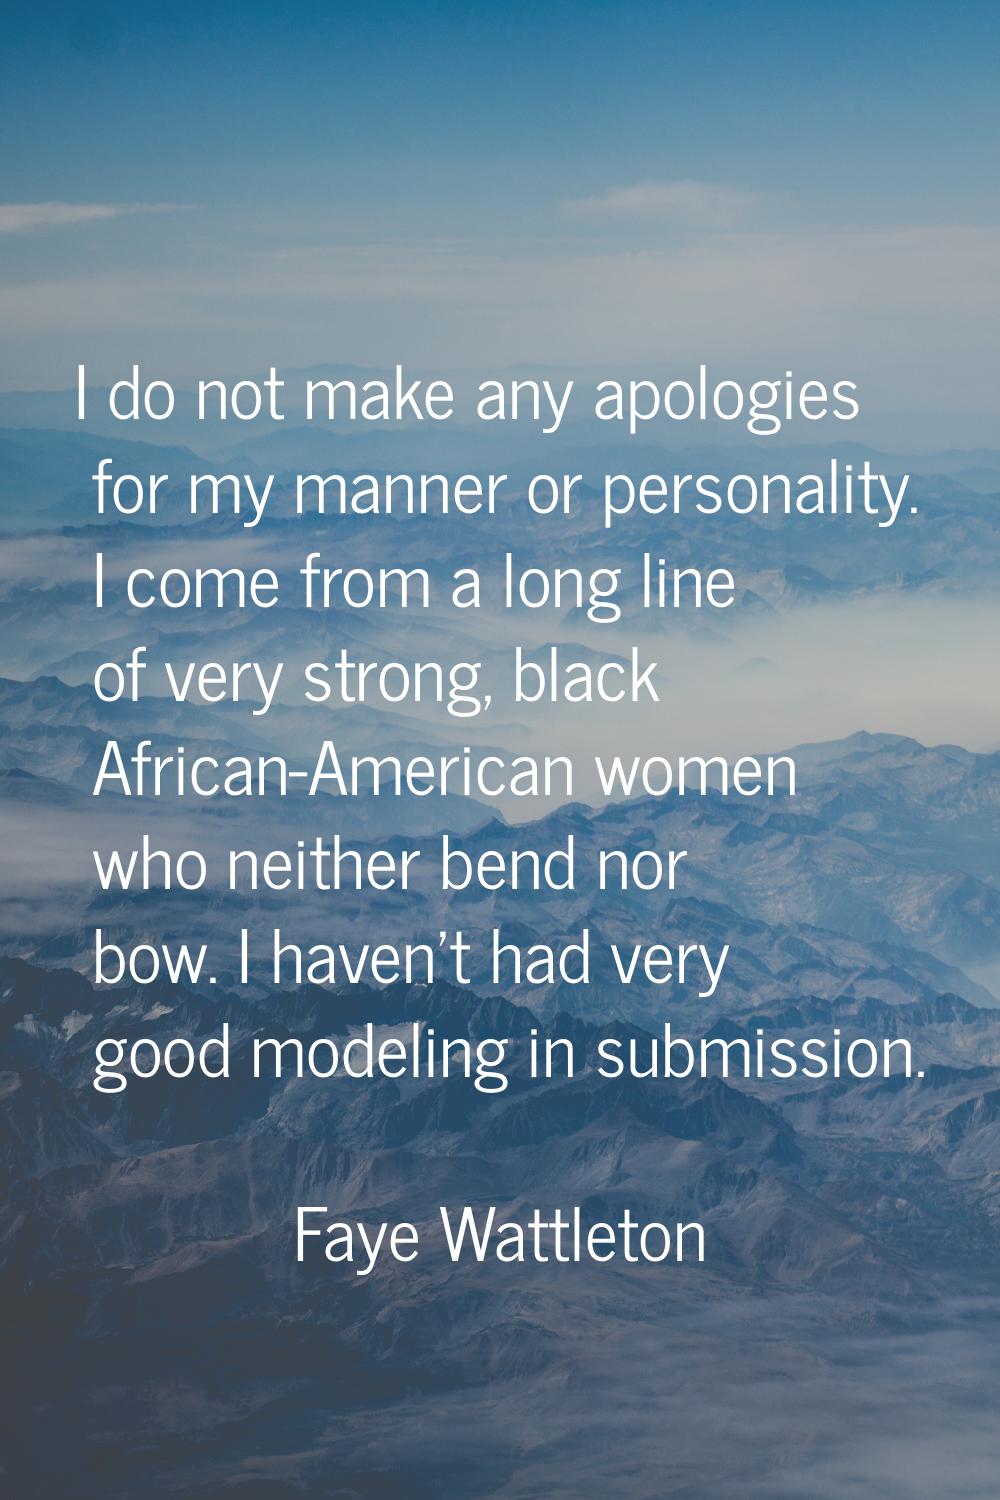 I do not make any apologies for my manner or personality. I come from a long line of very strong, b